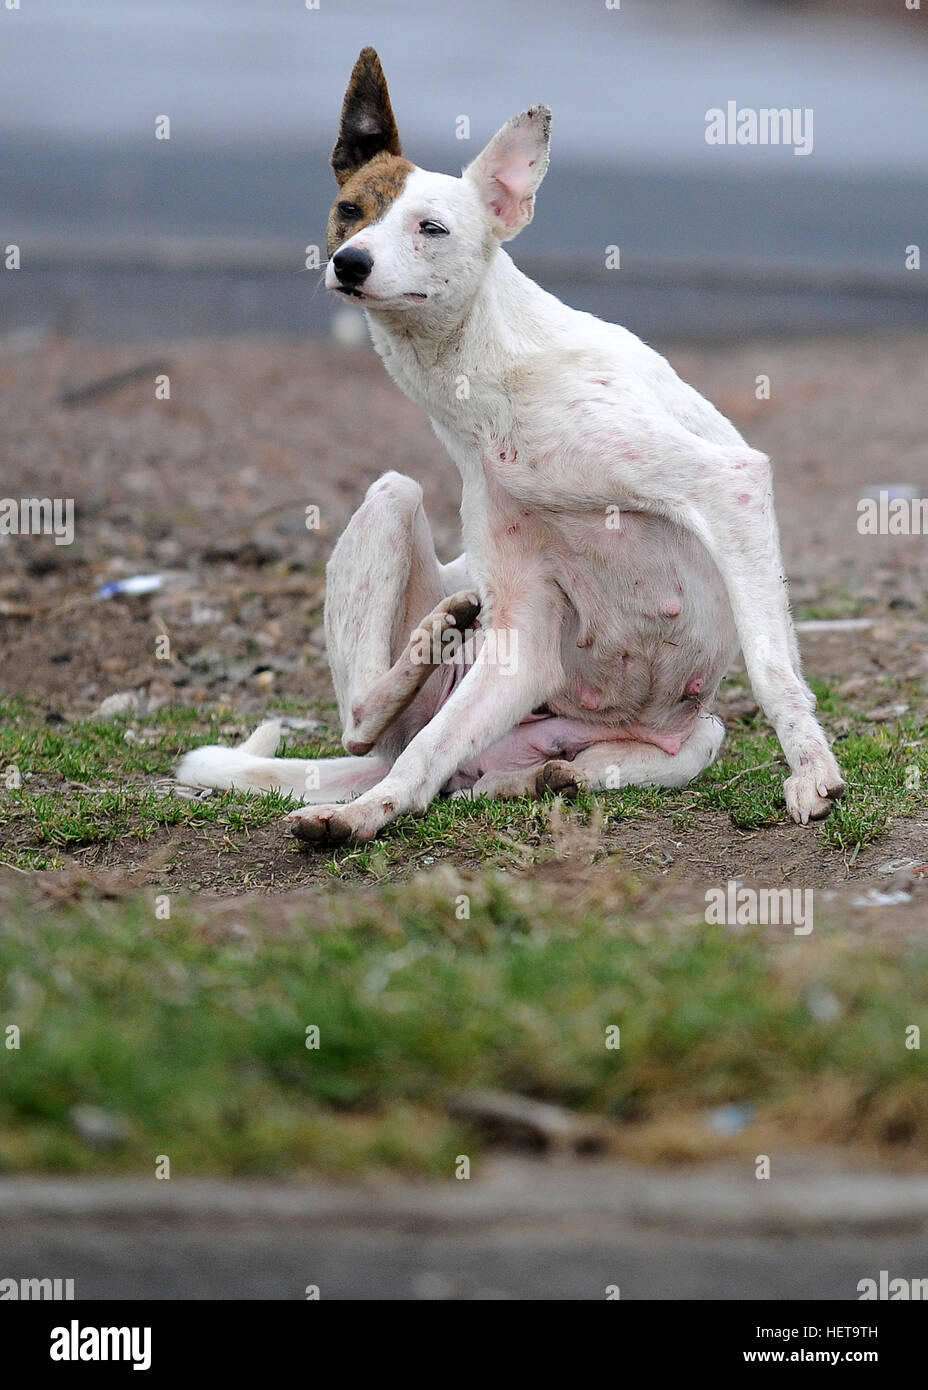 A scrawny scabby dog itches fleas from its body. Stock Photo